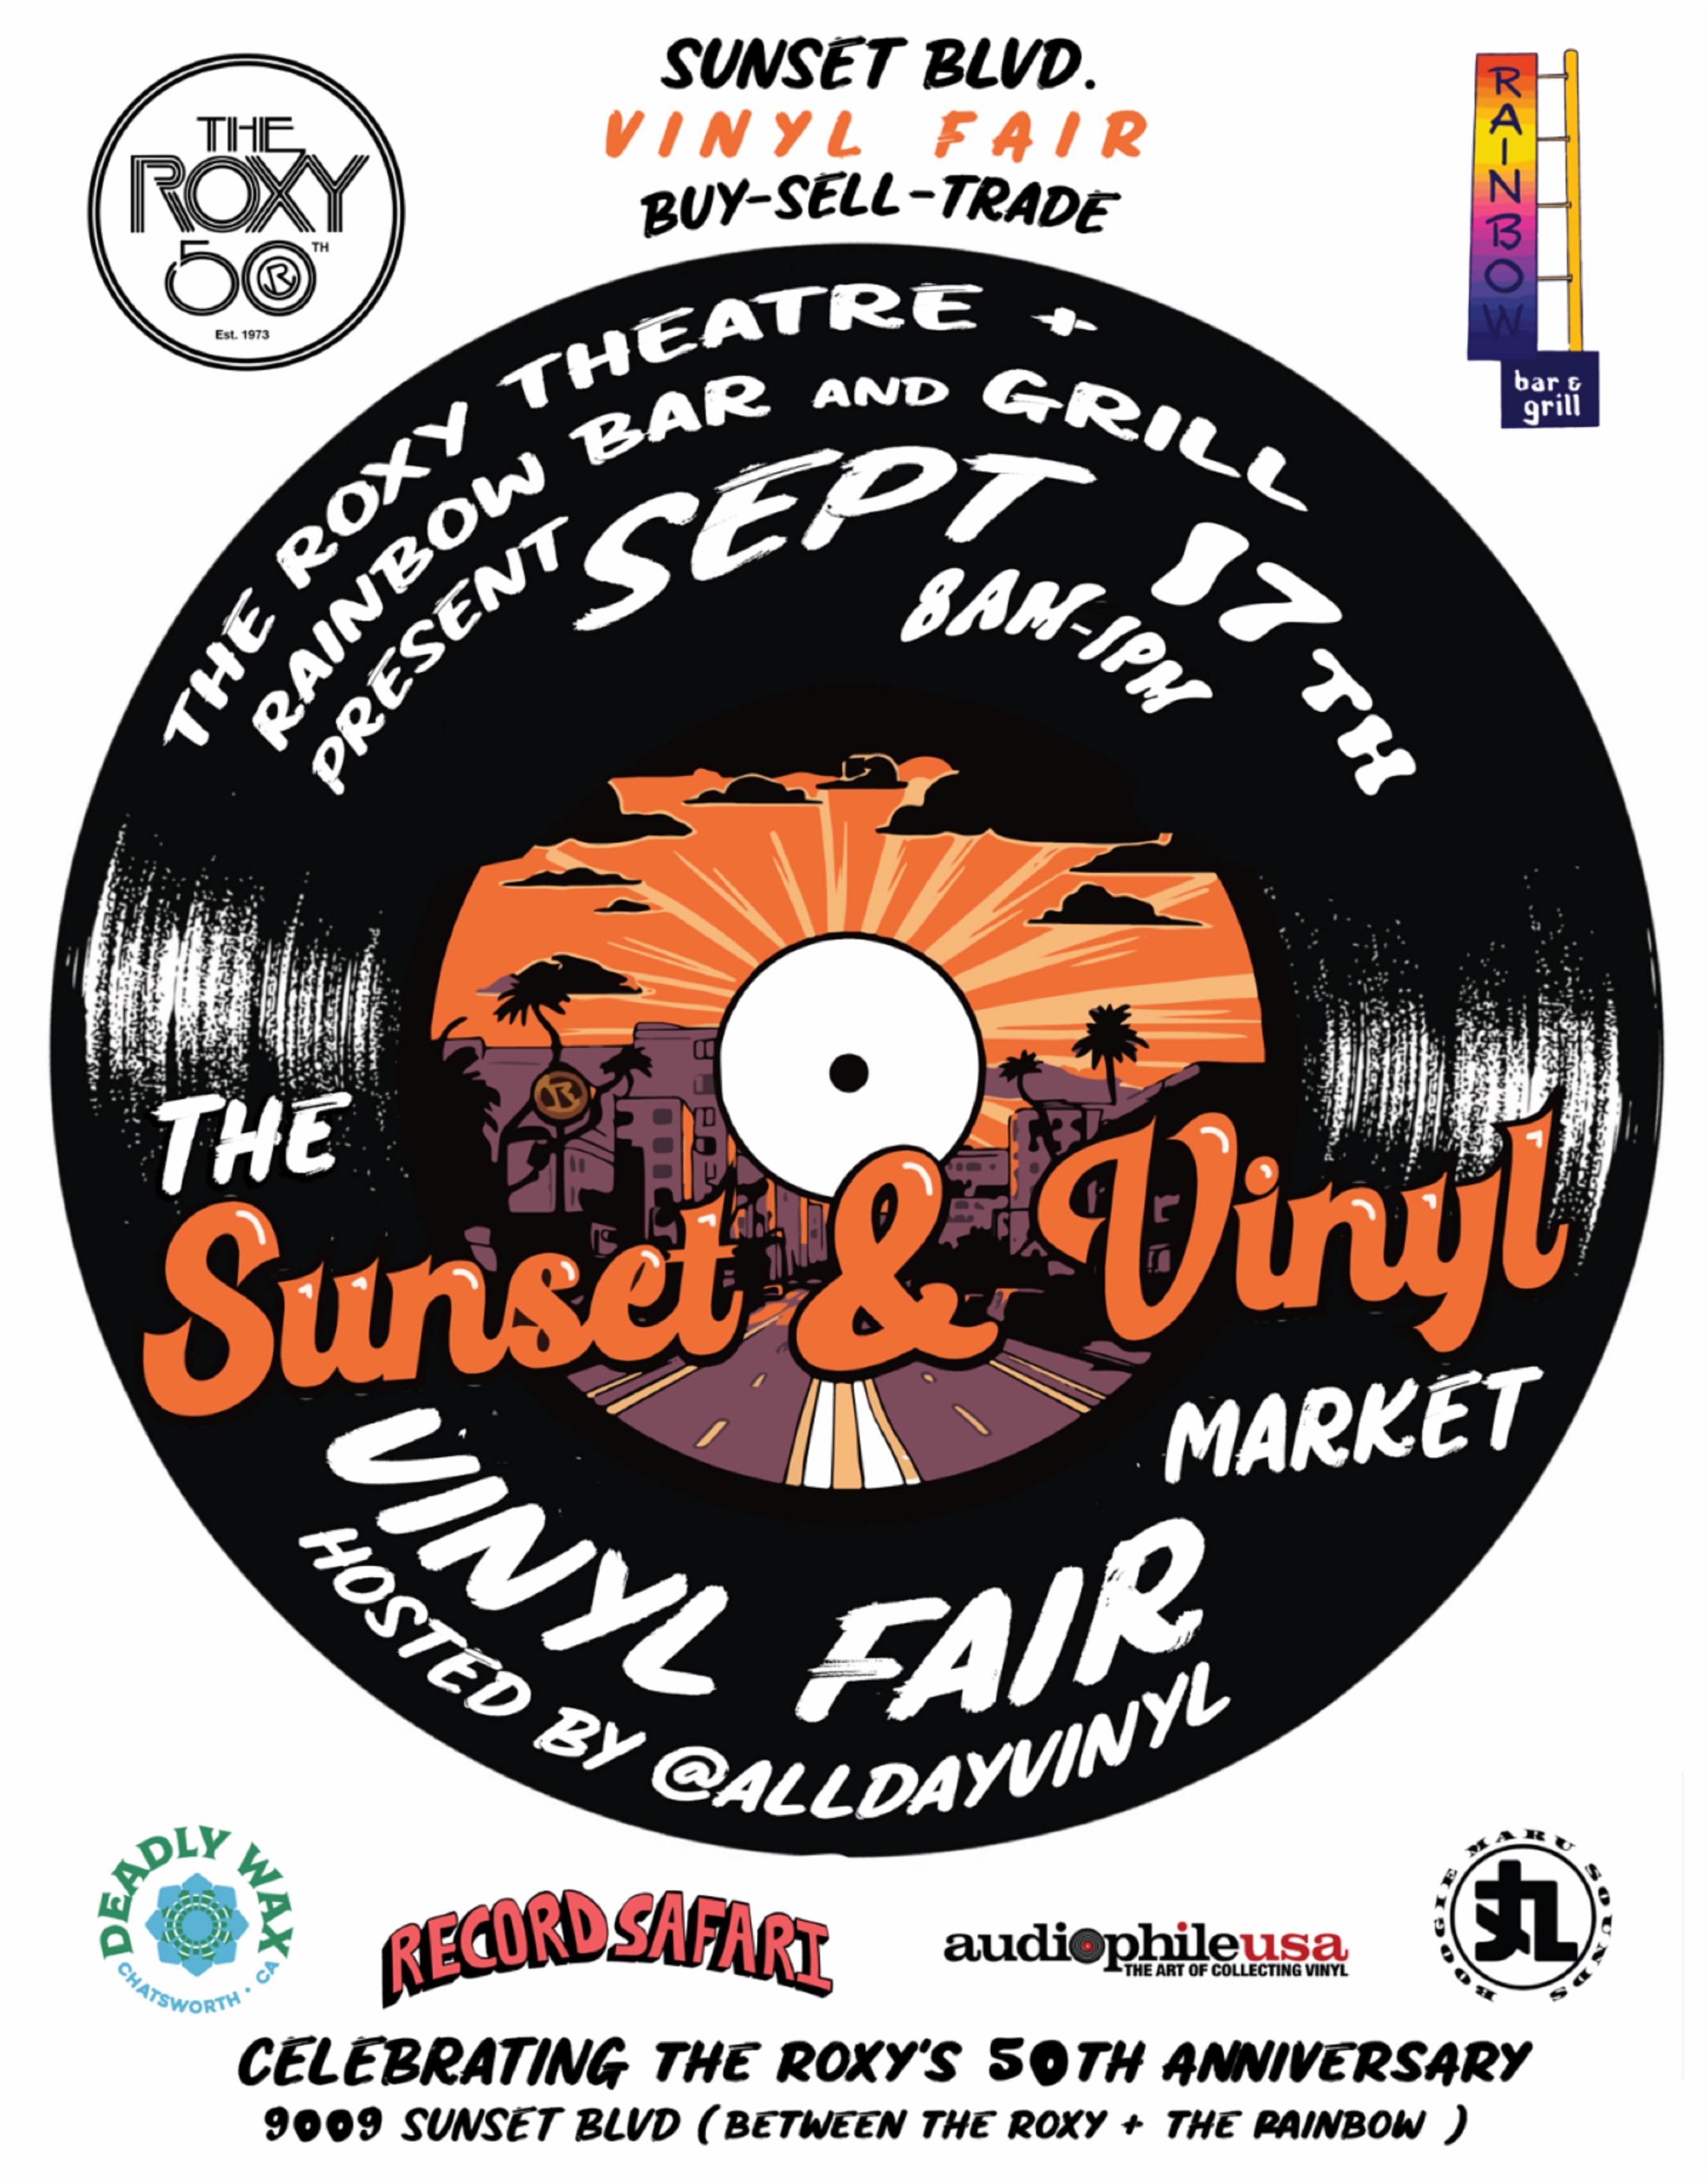 The Roxy to hold inaugural Sunset & Vinyl record fair 9/17 + more 50th anniversary shows announced